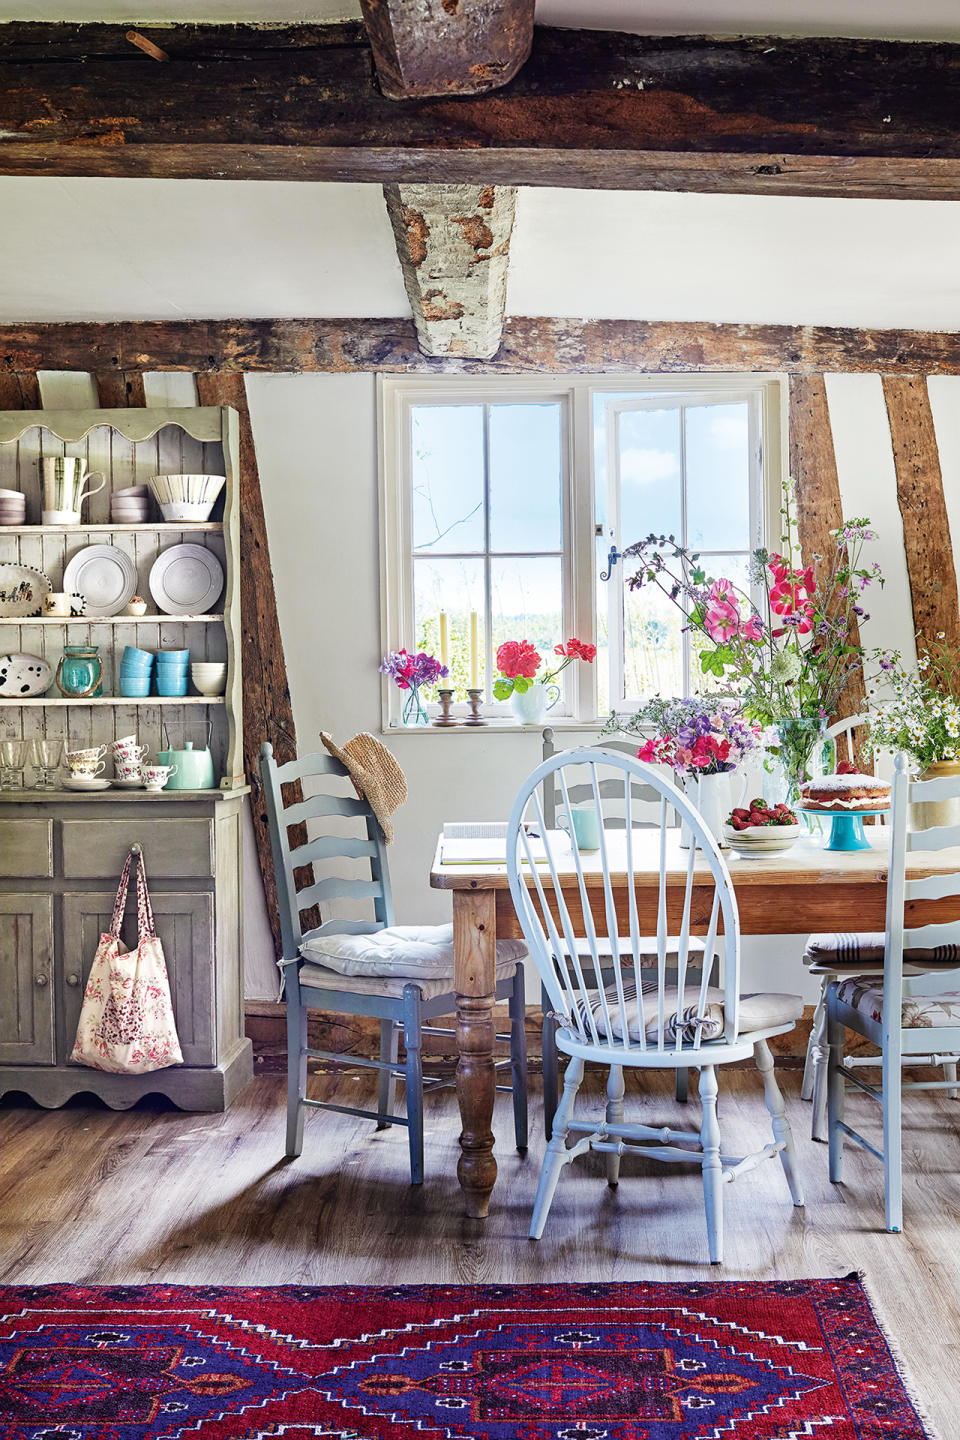 <p> &apos;Where once kitchens were purely practical and designed to be functional, now we are looking to create lived-in looks for them that are more a reflection of the decor in the rest of our homes, particularly our living spaces,&apos; says&#xA0;<em>Homes &amp; Gardens</em>&#xA0;Editor in Chief Lucy Searle. </p> <p> &apos;The easiest way to transform an existing kitchen is with textiles &#x2013; rugs or runners that can withstand or disguise the odd splash or stain along a run of cabinetry or under a dining table, and pretty cushion pads on seats are a good place to start. Another way to introduce color and texture is by showing off decorative china and pottery on open shelving.&apos; </p>